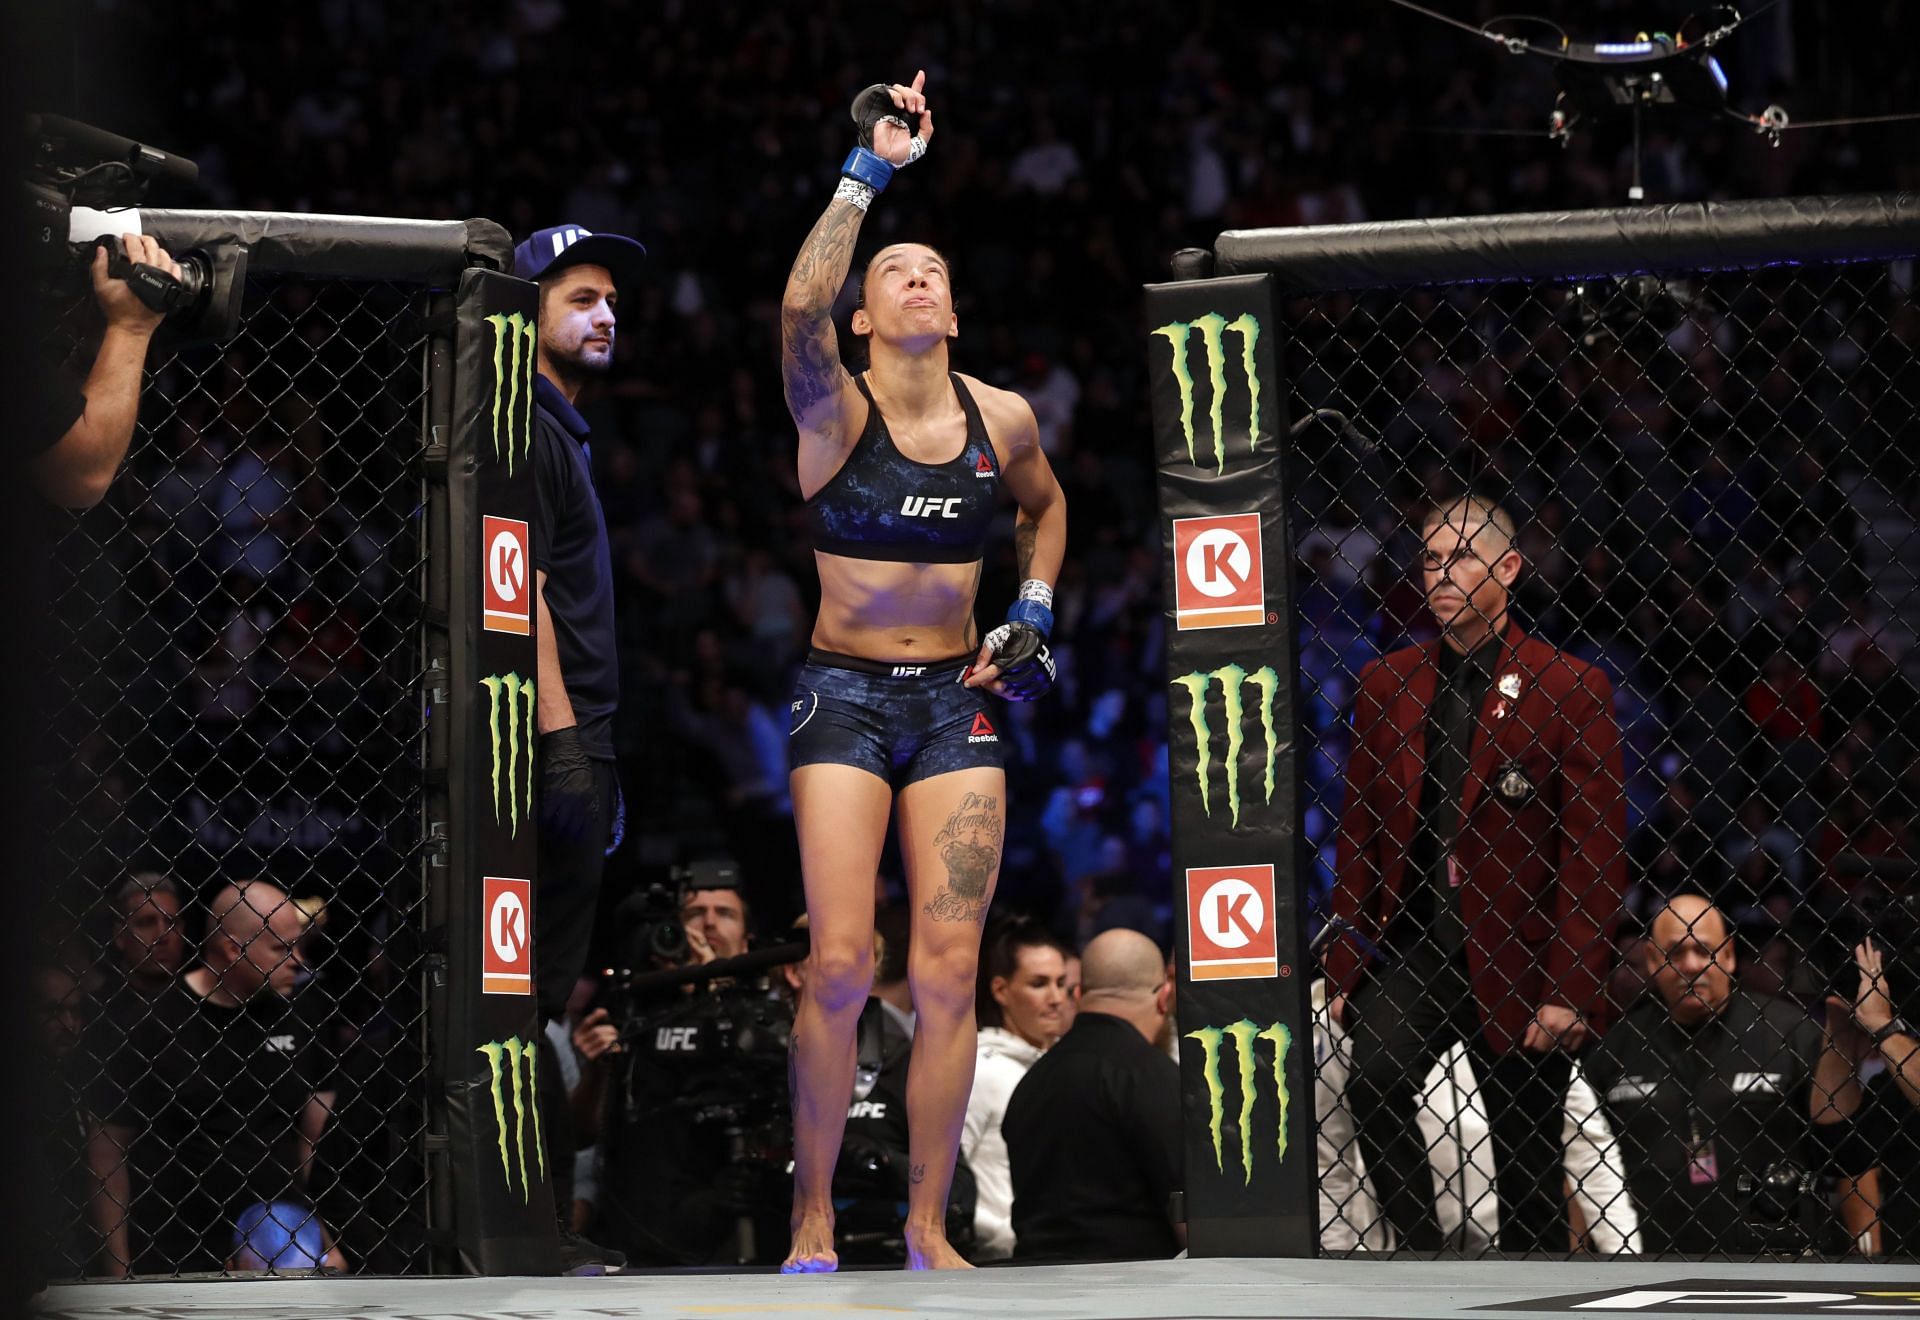 In kickboxing, Germaine de Randamie is undefeated and has 30 knockouts